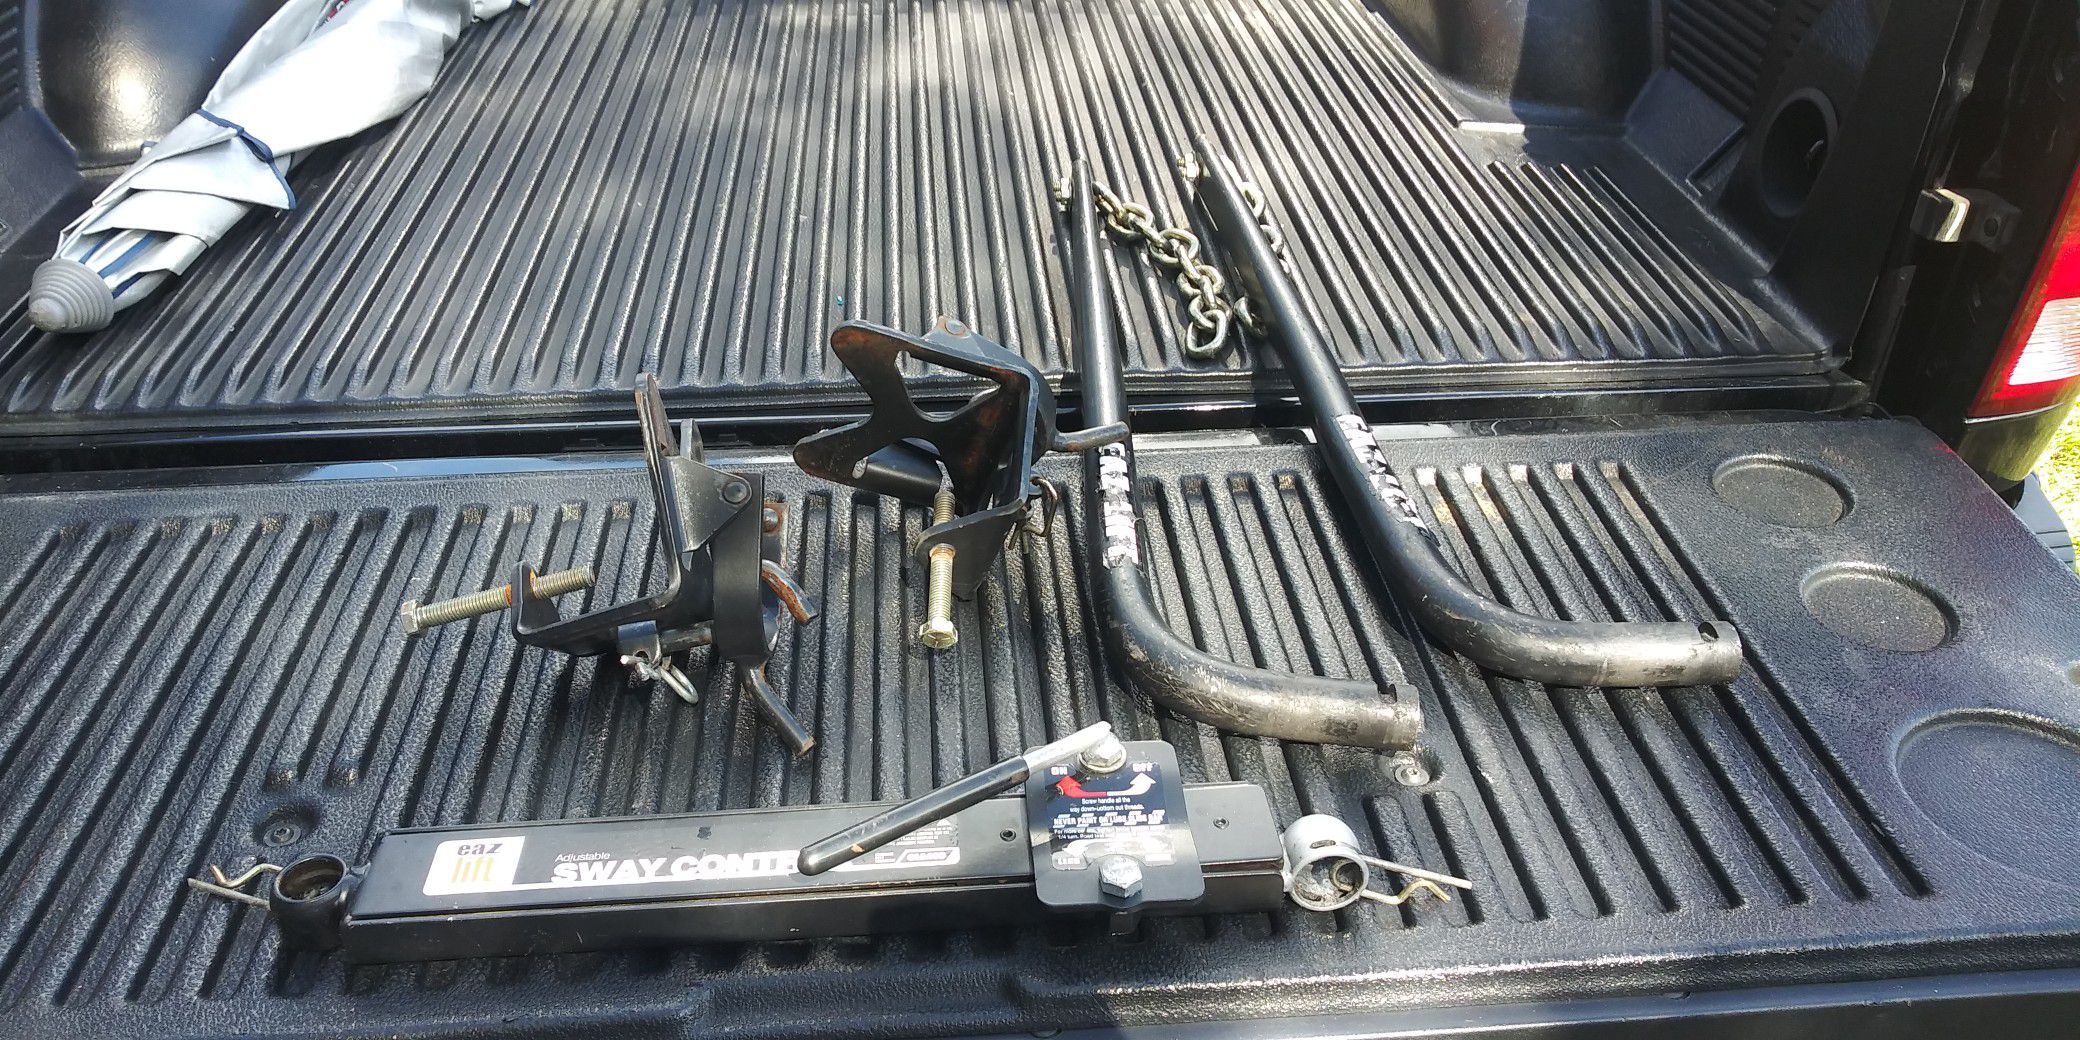 RV connection tools